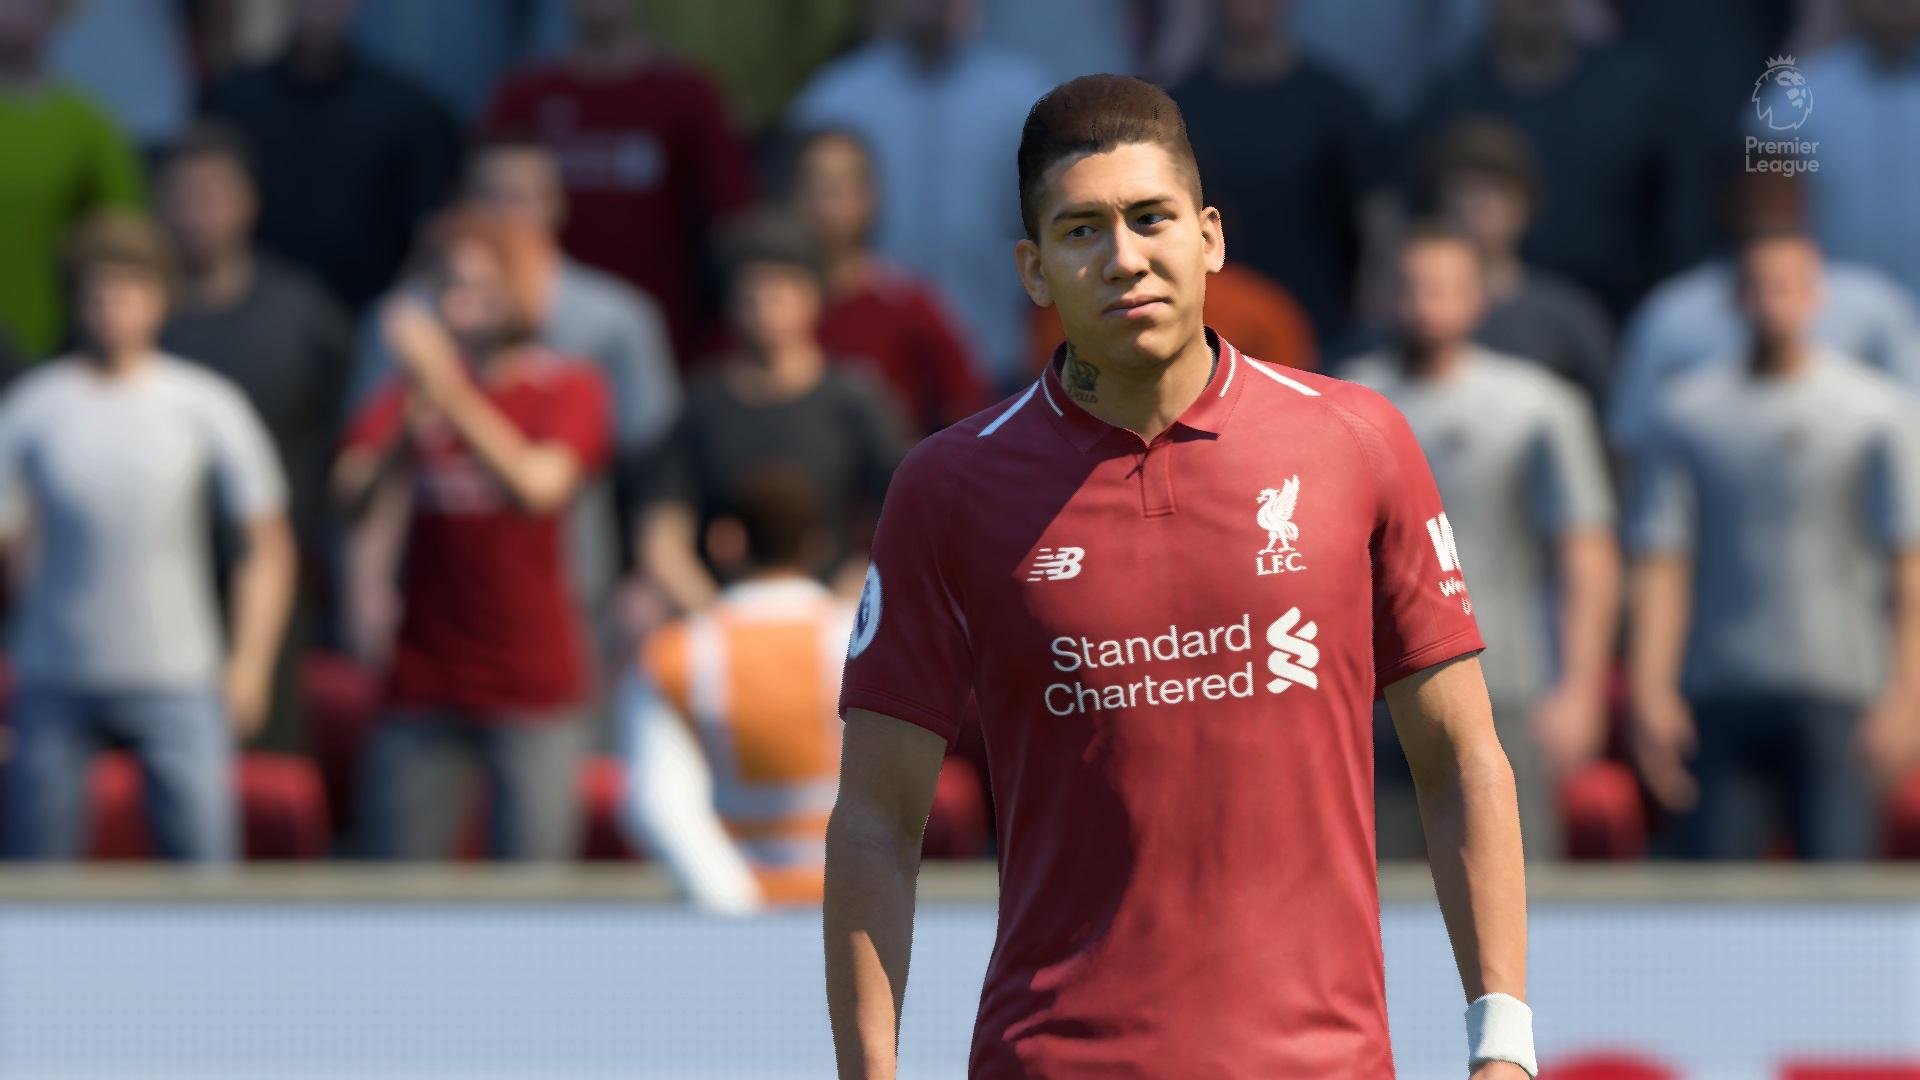 FIFA 20: Liverpool Career Mode Guide, approaches, formations, transfers & pointers